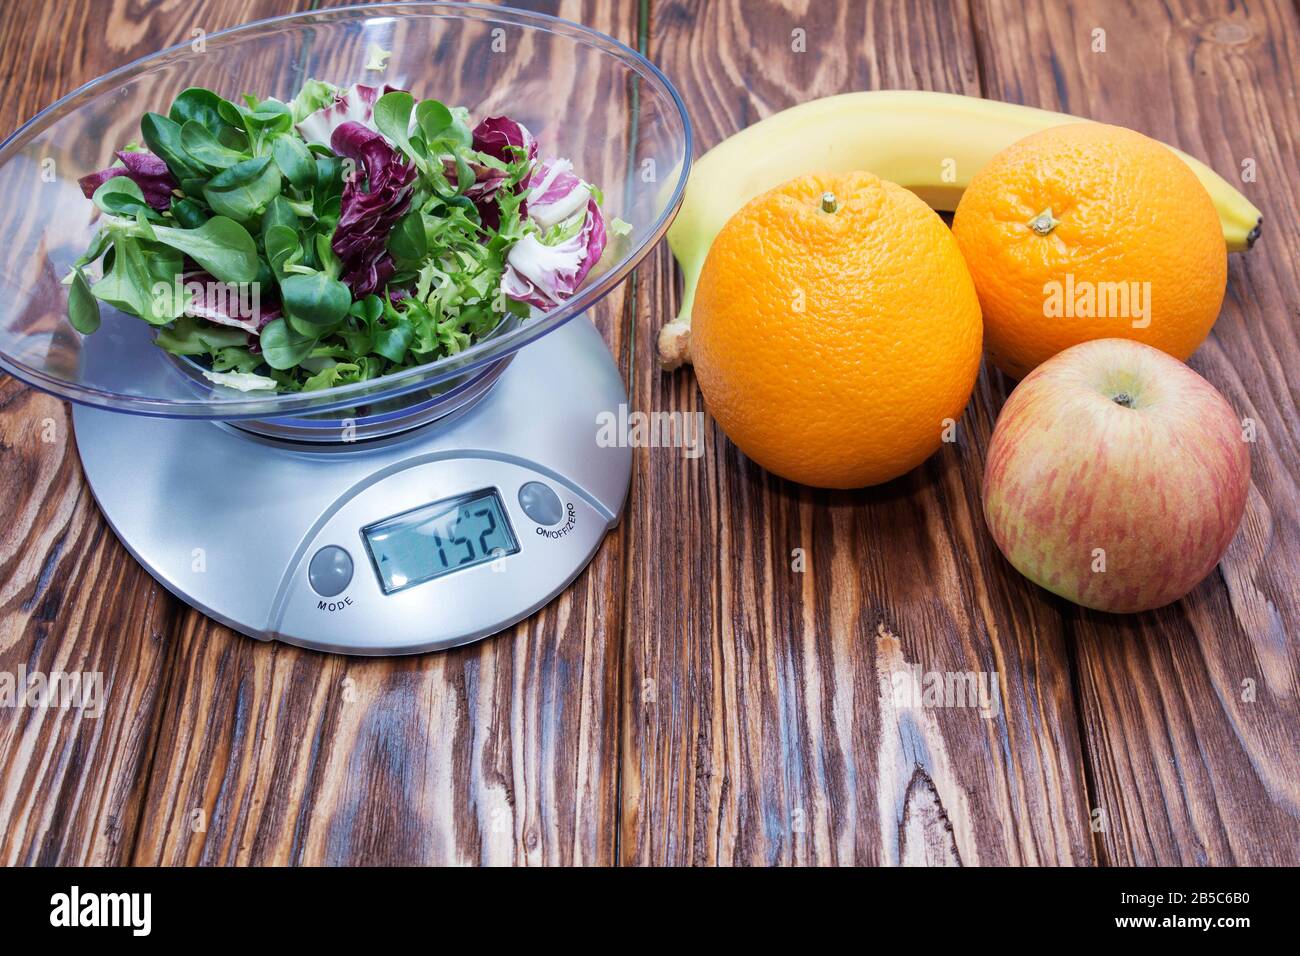 green lettuce leaves on the kitchen scale. banana Apple orange on wooden table Stock Photo